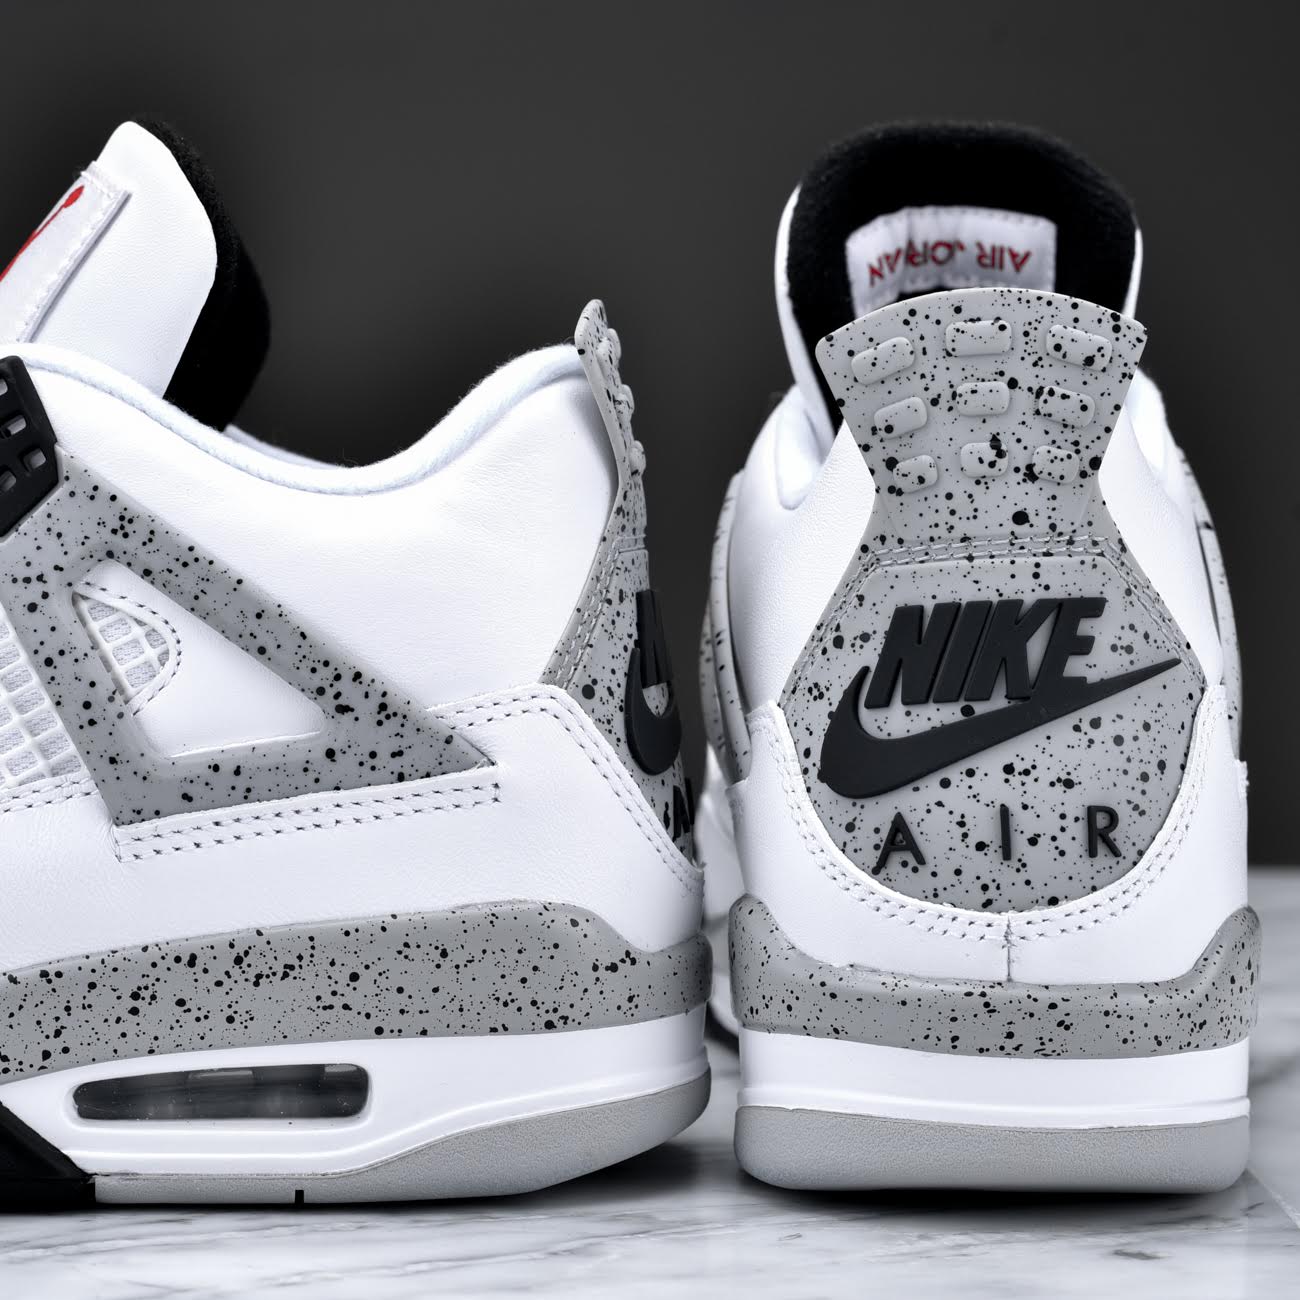 Your Best Look Yet at the Remastered Air Jordan 4 Retro in White